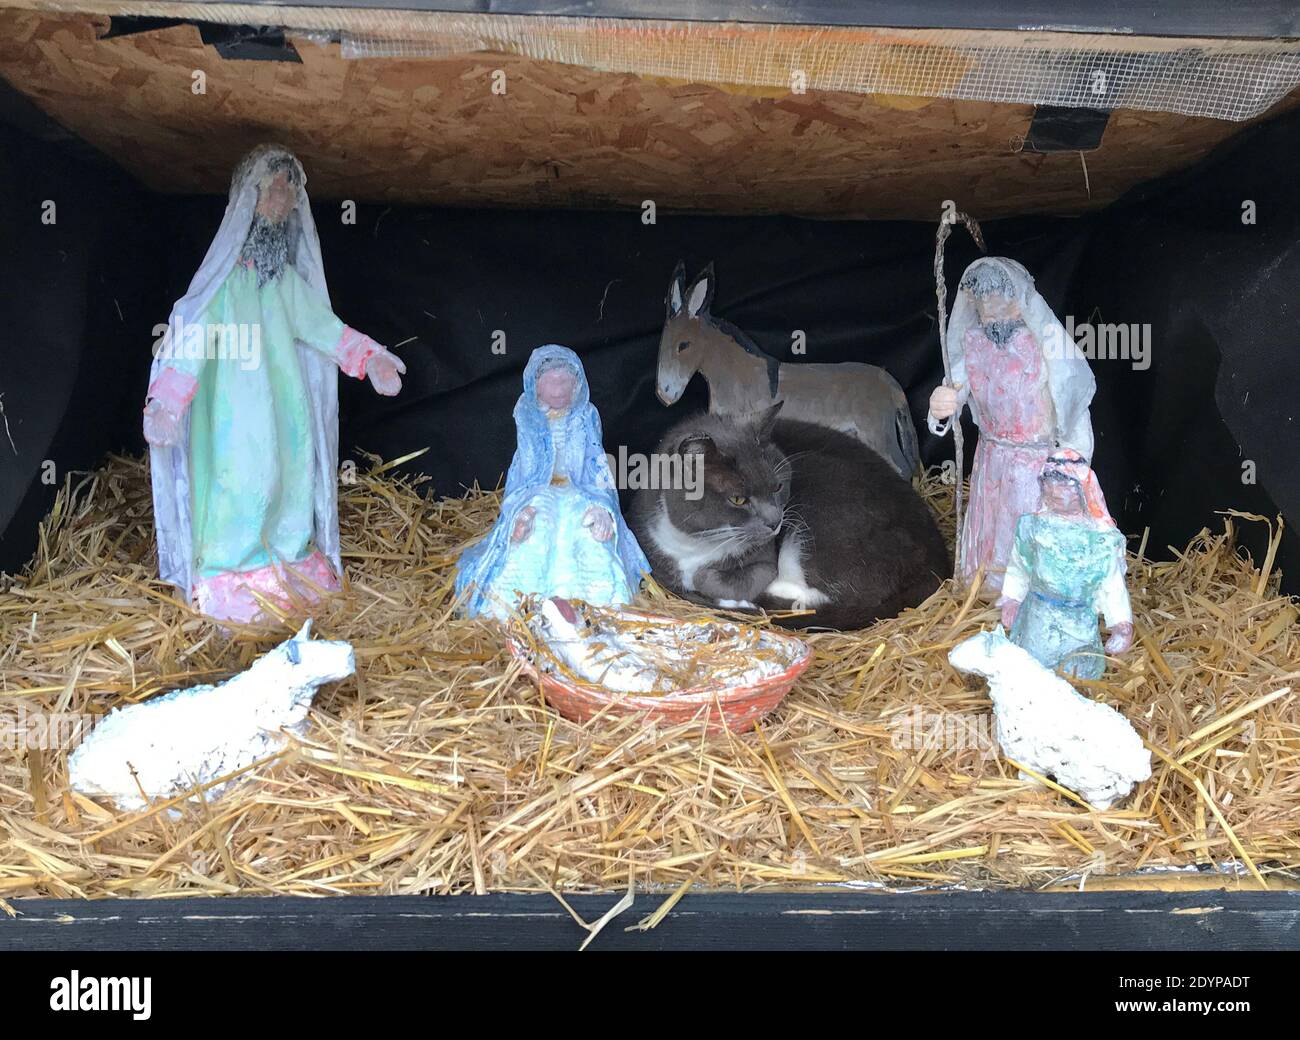 27 December 2020 Swanbourne Buckinghamshire UK Socks the cat decided to spend her Christmas in the comfort of the Nativity stable outside Swanbourne Metchodist Chapel. The Tableau was designed by local artist Michelle Greene and constructed by local parishioners five years ago. It is popular attraction, especially with the local children when it comes out on display every year in for the festive season. Socks does have a permanent home nearby, but prefers to join Baby Jesus, Joseph and Mary, the three wise Magi and the donkey in her warm and comfortable straw bed. The only time she leaves is Stock Photo